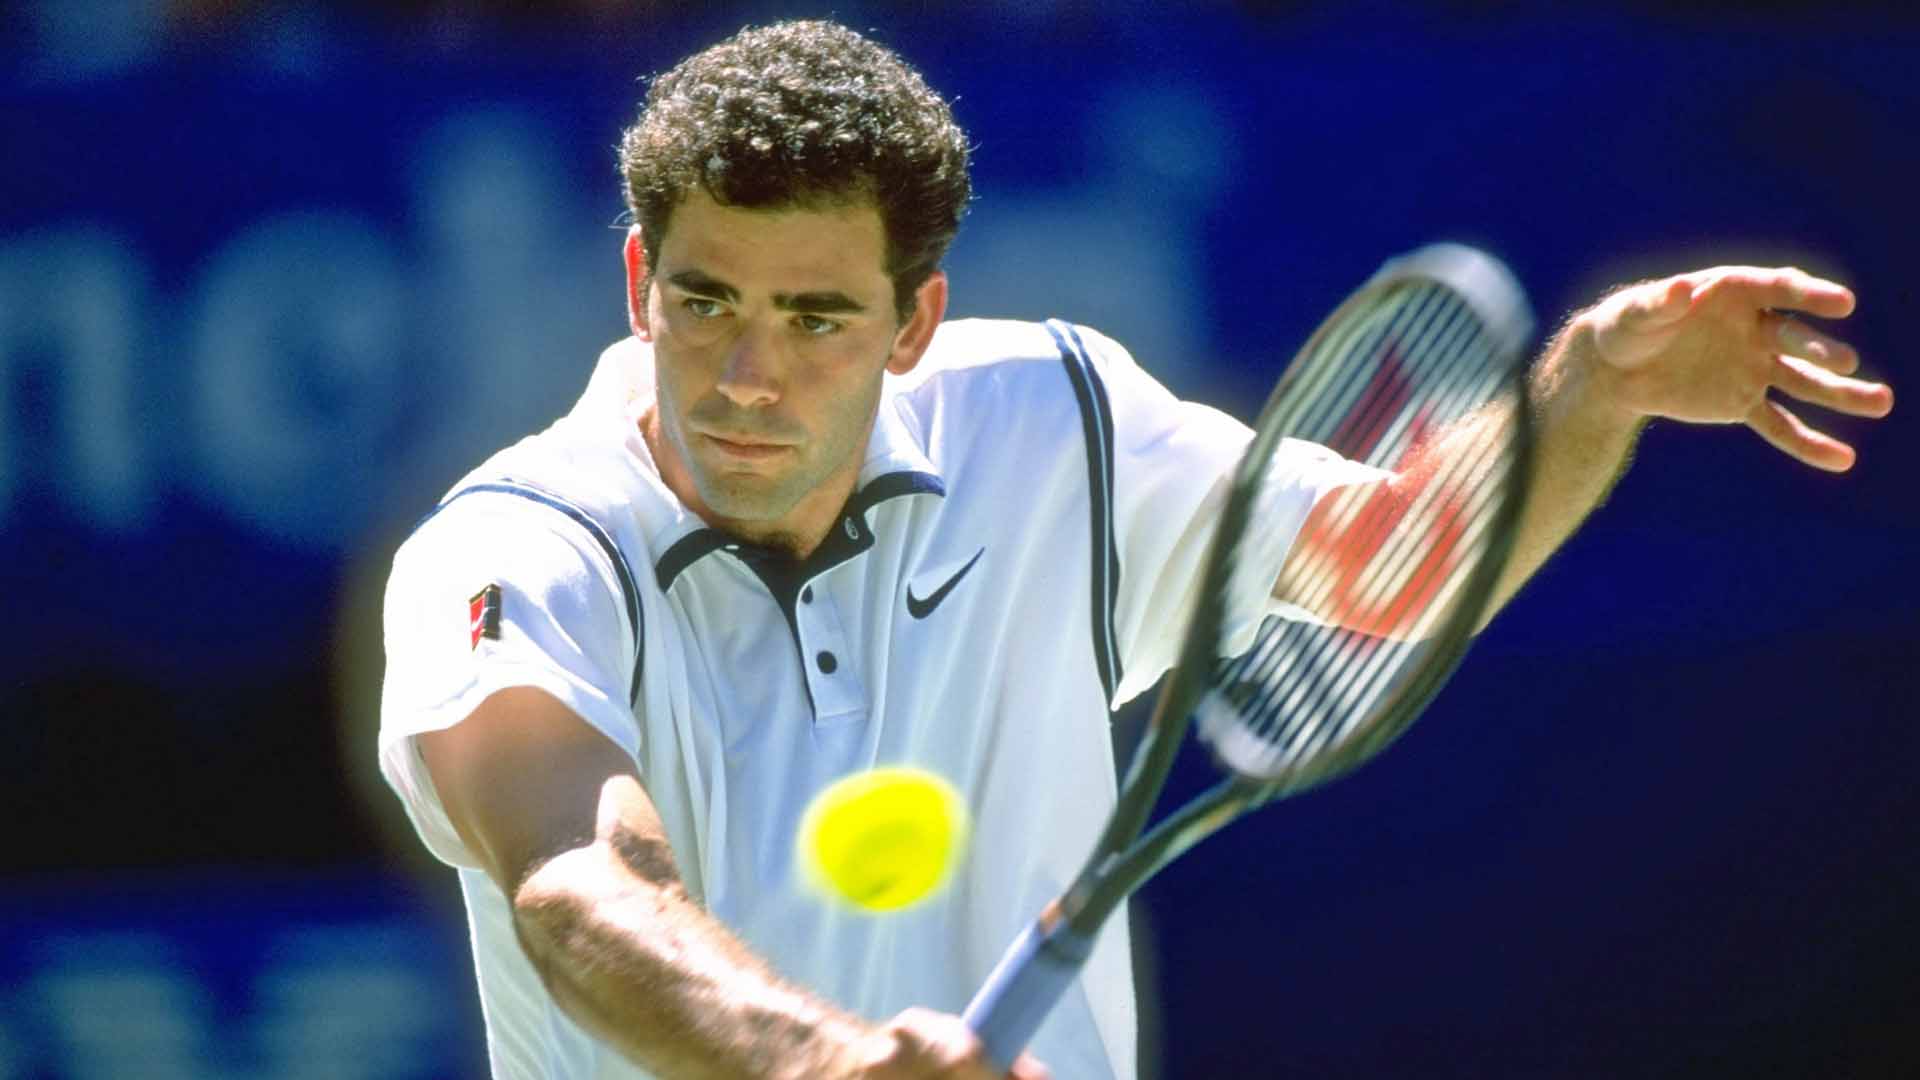 14-facts-about-pete-sampras